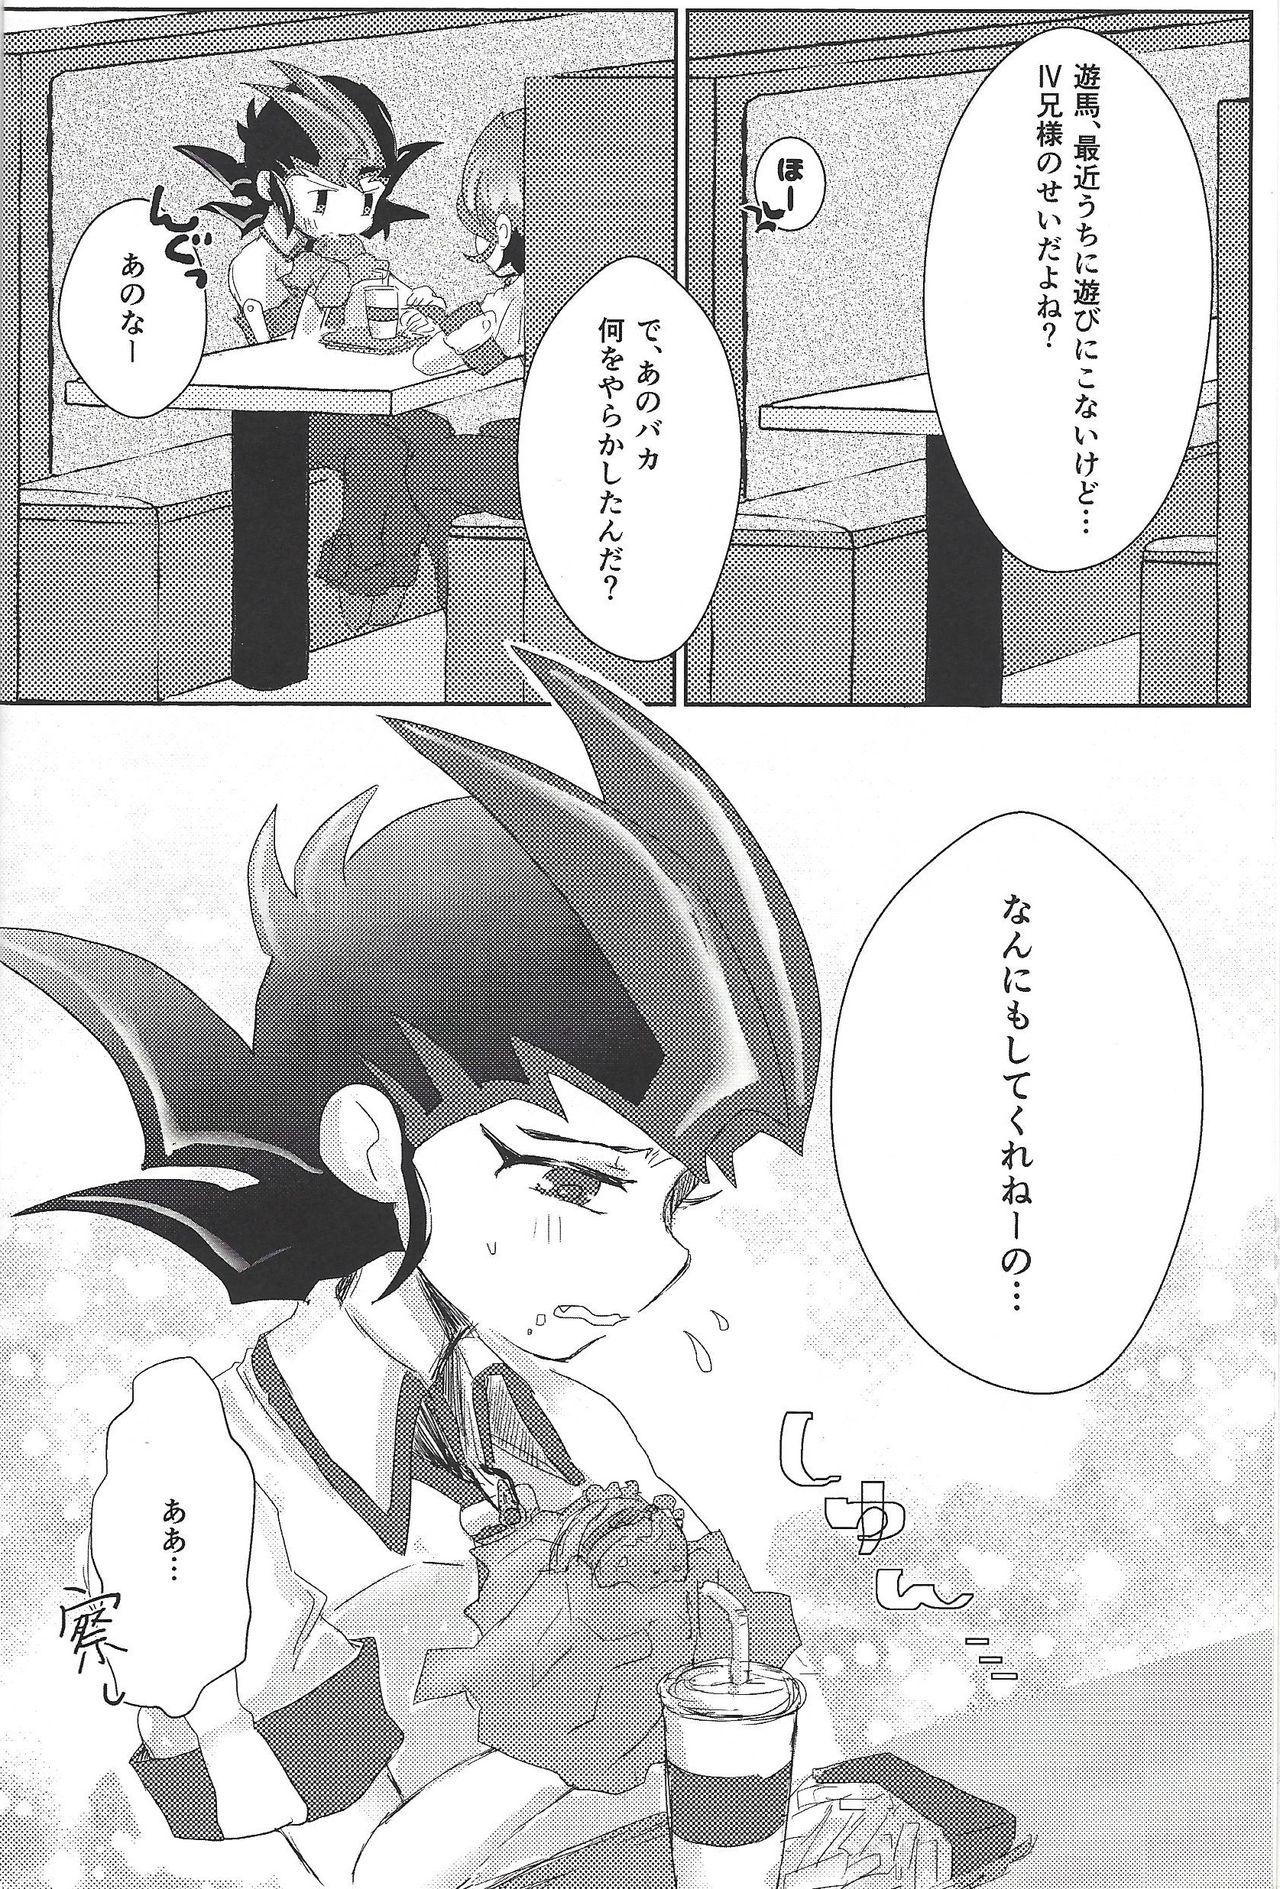 Amateur Weekend For You - Yu-gi-oh zexal Hentai - Page 11